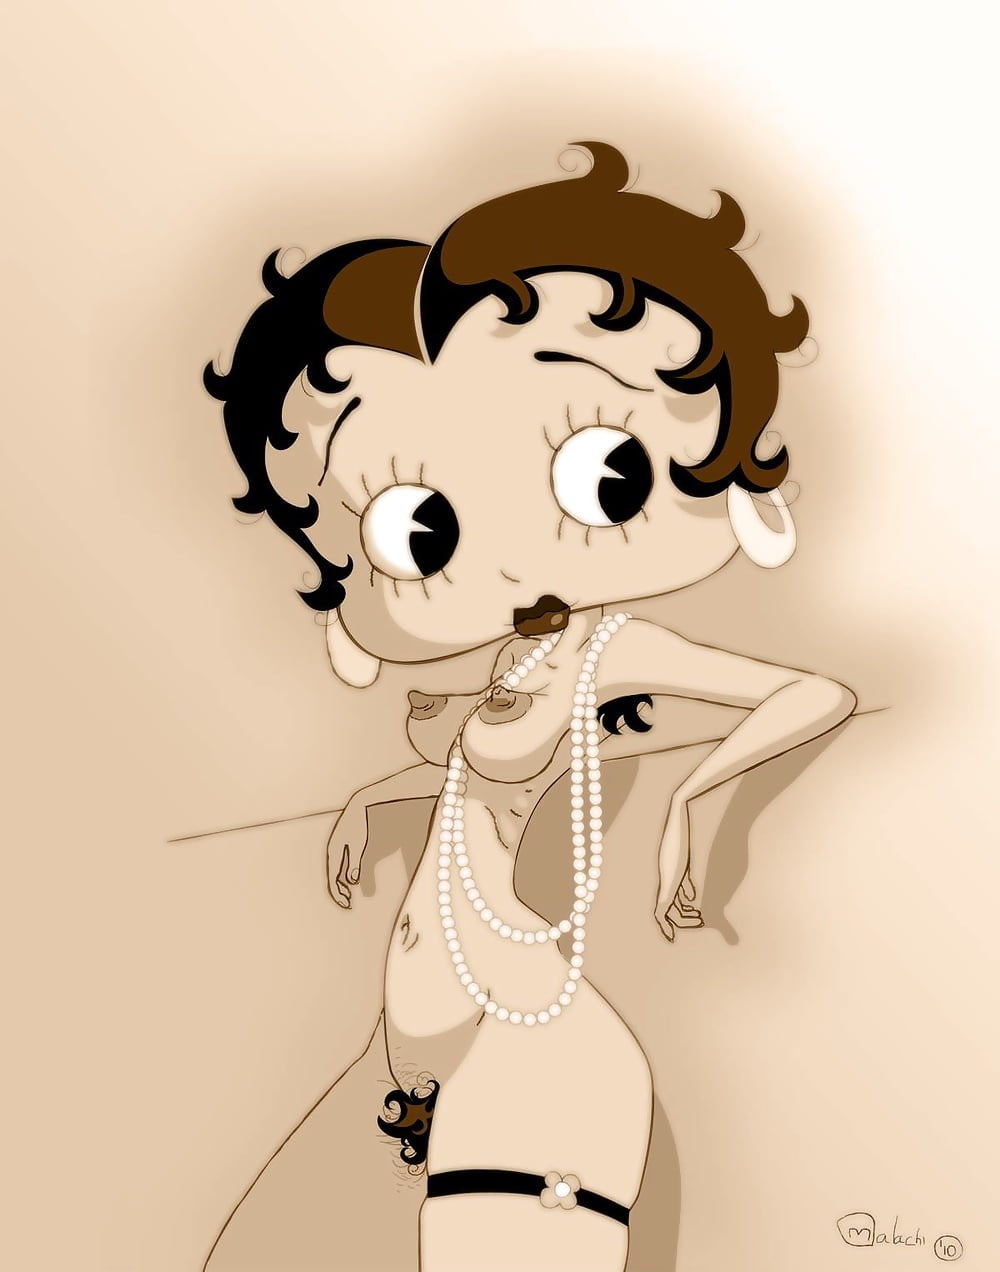 Betty Boop Porn - See and Save As betty boop rules porn pict - 4crot.com